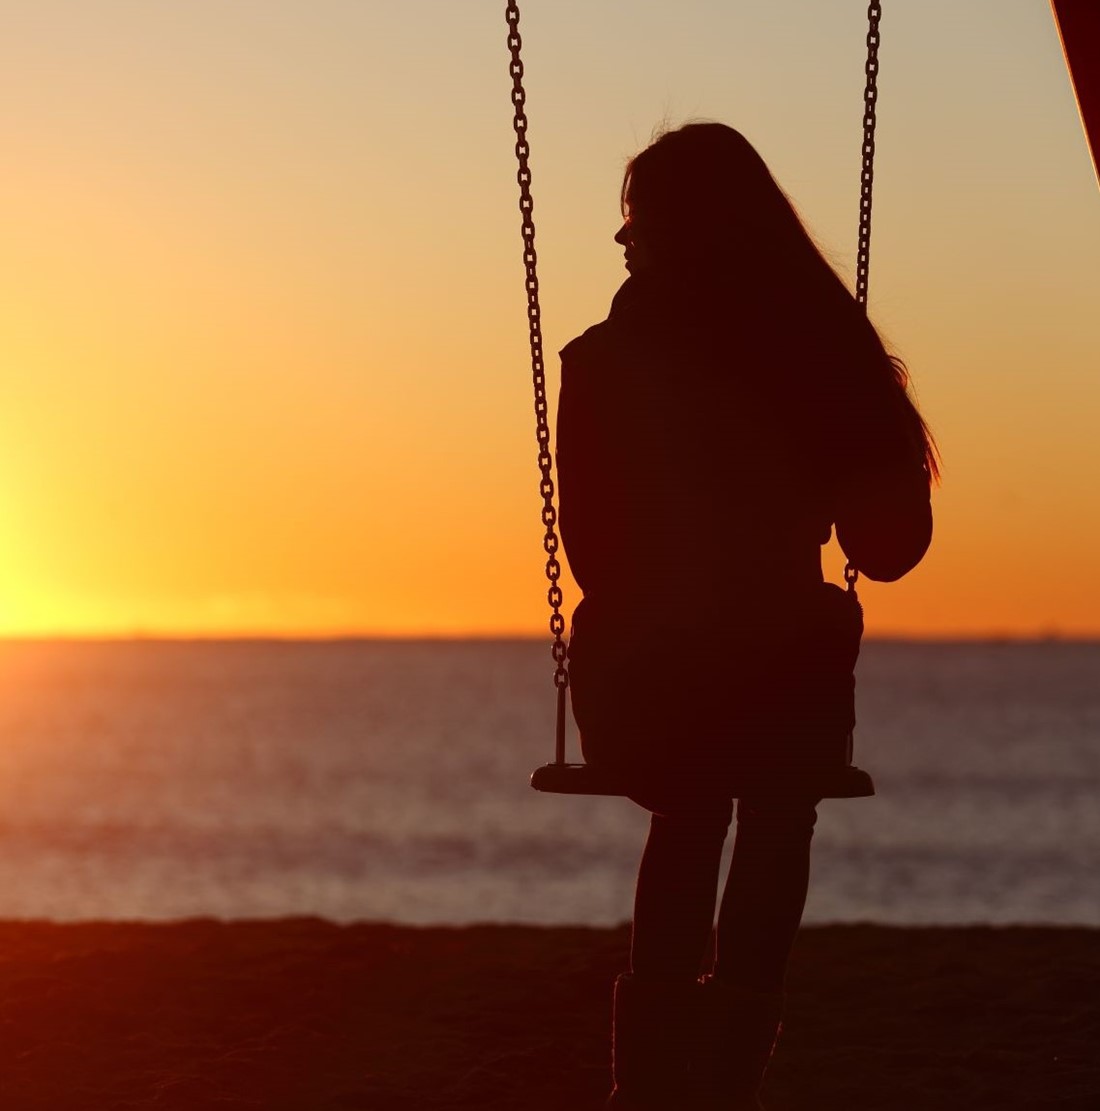 Girl on swing looking out to sunset